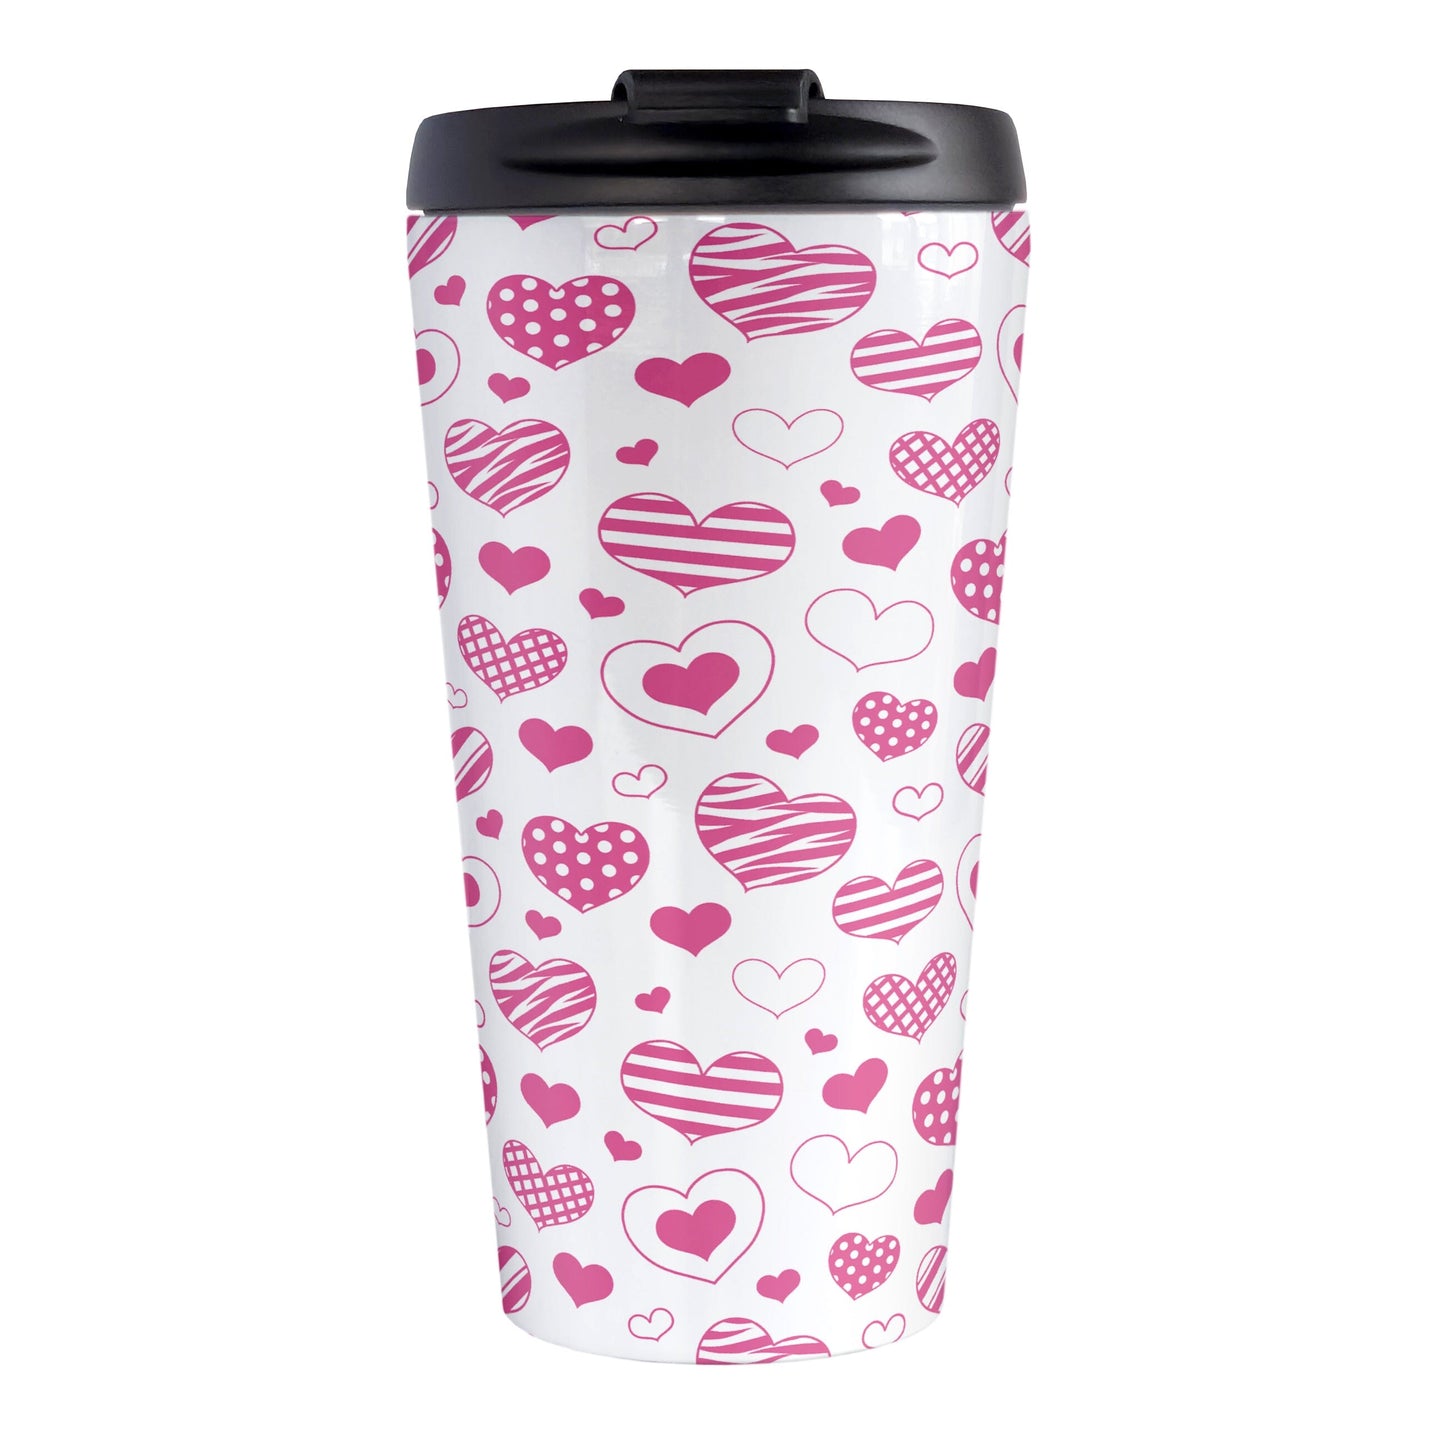 Pink Heart Doodles Travel Mug (15oz) at Amy's Coffee Mugs. A stainless steel travel mug designed with hand-drawn pink heart doodles in a pattern that wraps around the travel mug. This cute heart pattern is perfect for Valentine's Day or for anyone who loves hearts and young-at-heart drawings. 